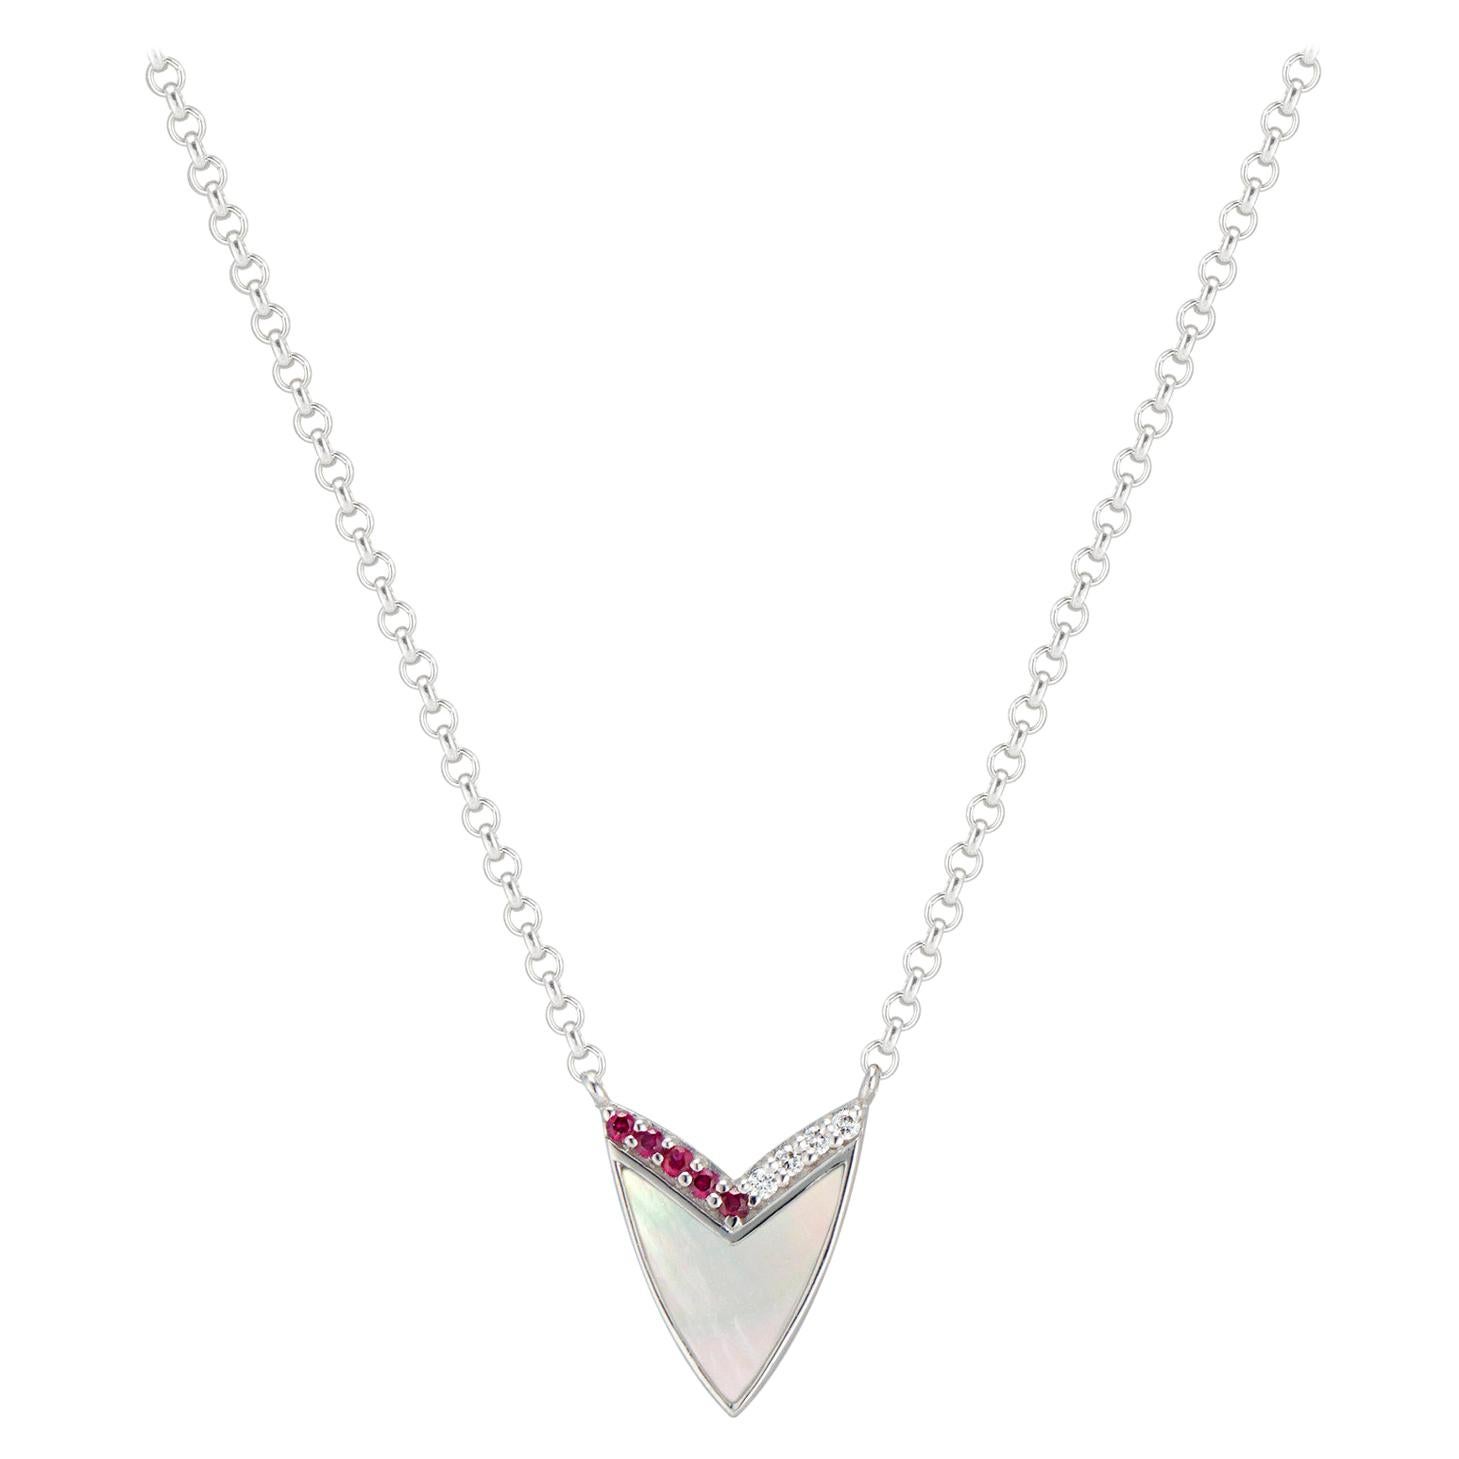 Cubist Heart Necklace with Mother of Pearl, Ruby, and Diamonds